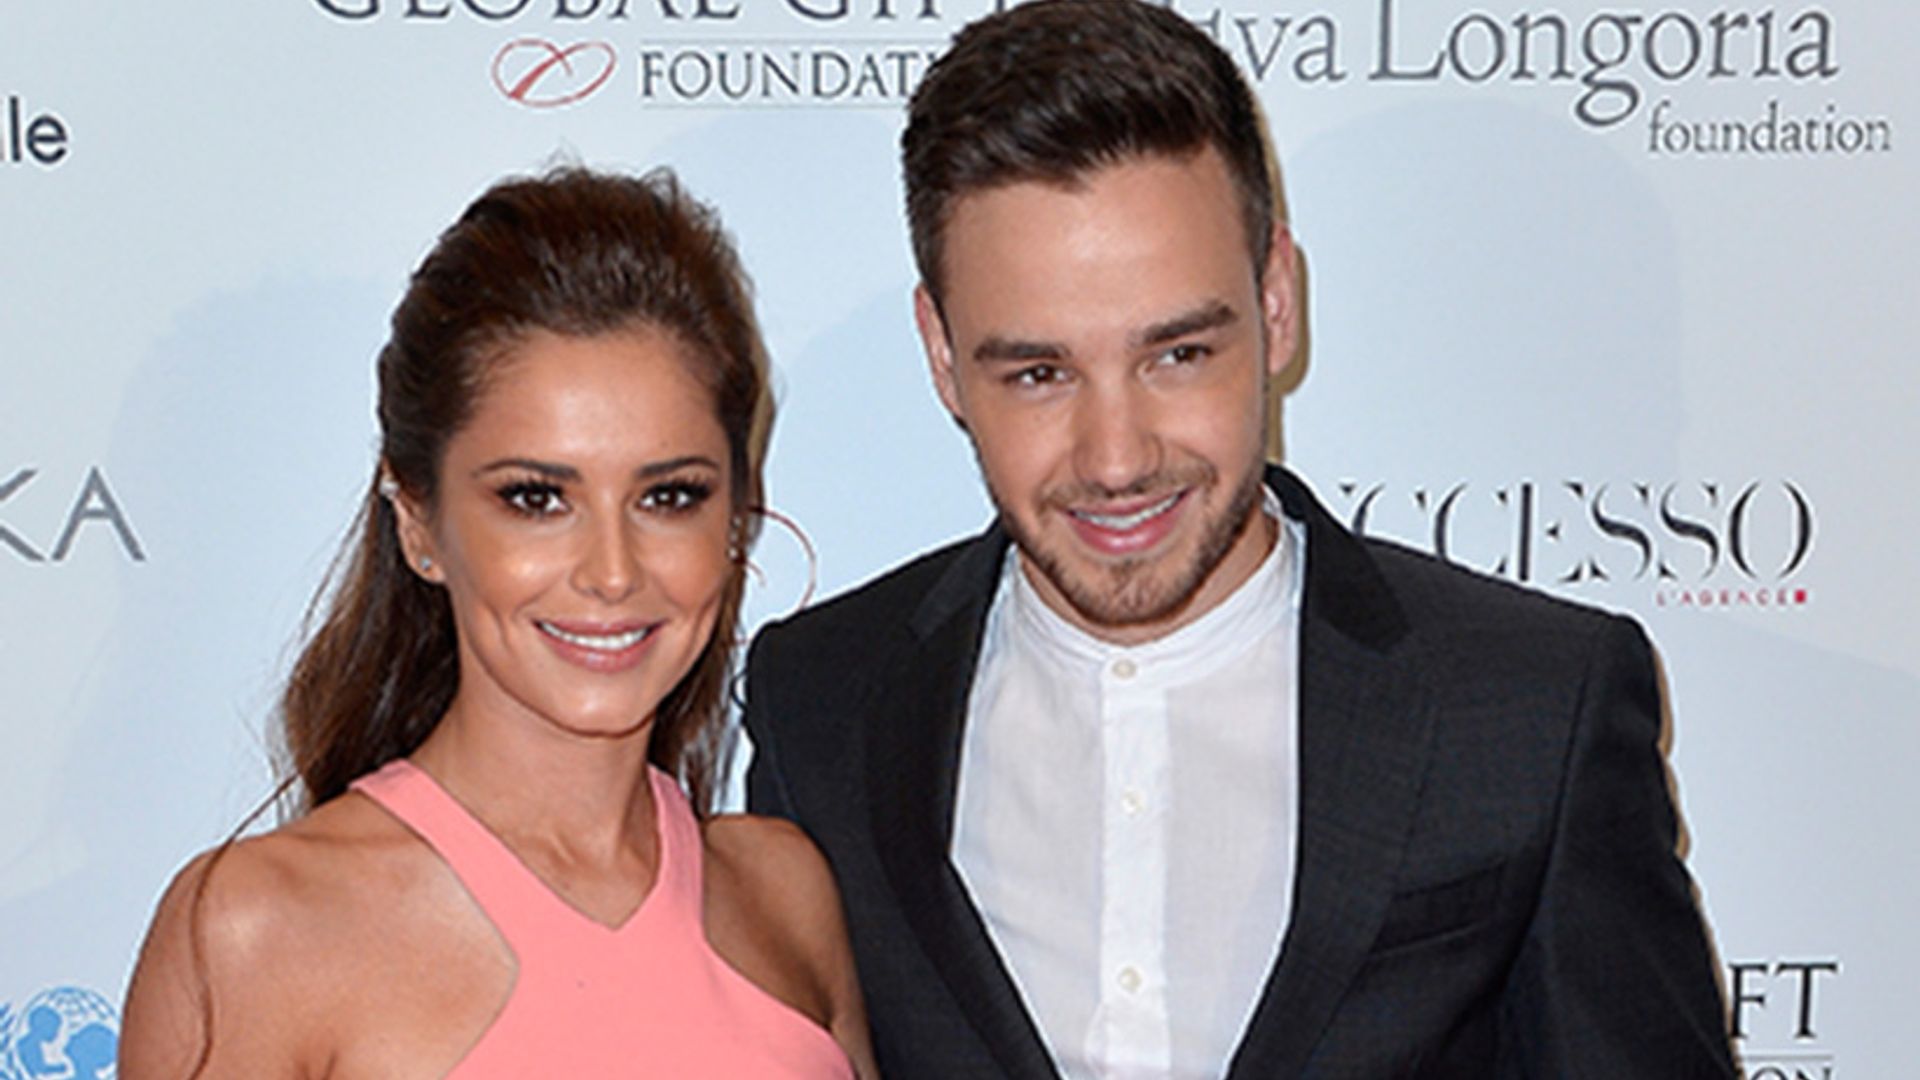 UPDATE: A rep for Liam Payne has told HELLO! online that he and Cheryl have not married